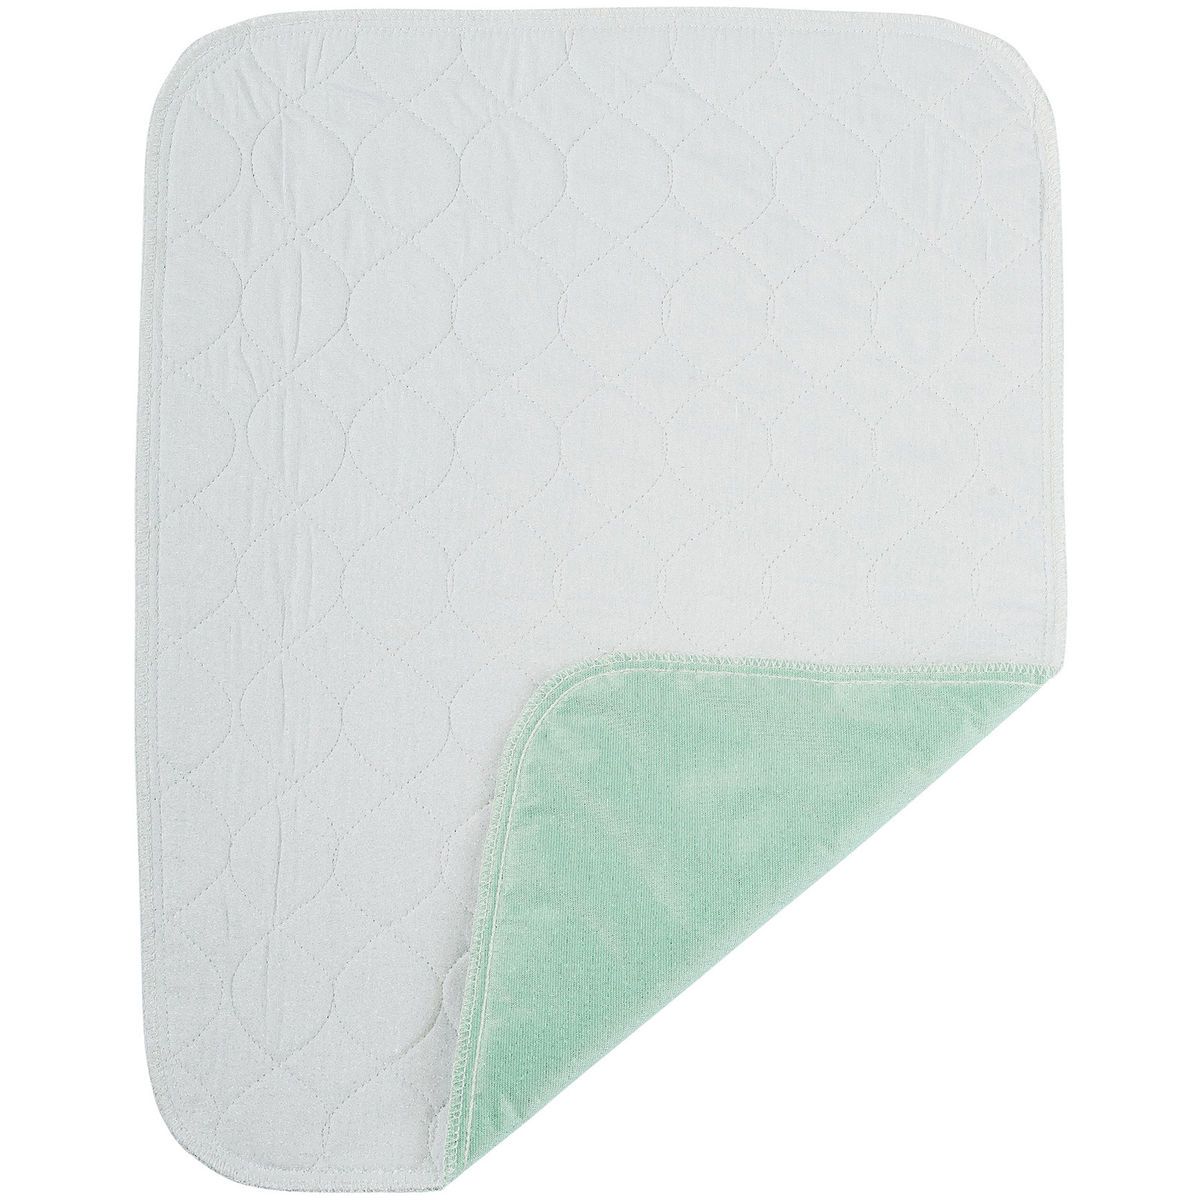 Bedwetting Incontinence Mattress Pad Protector 35X23